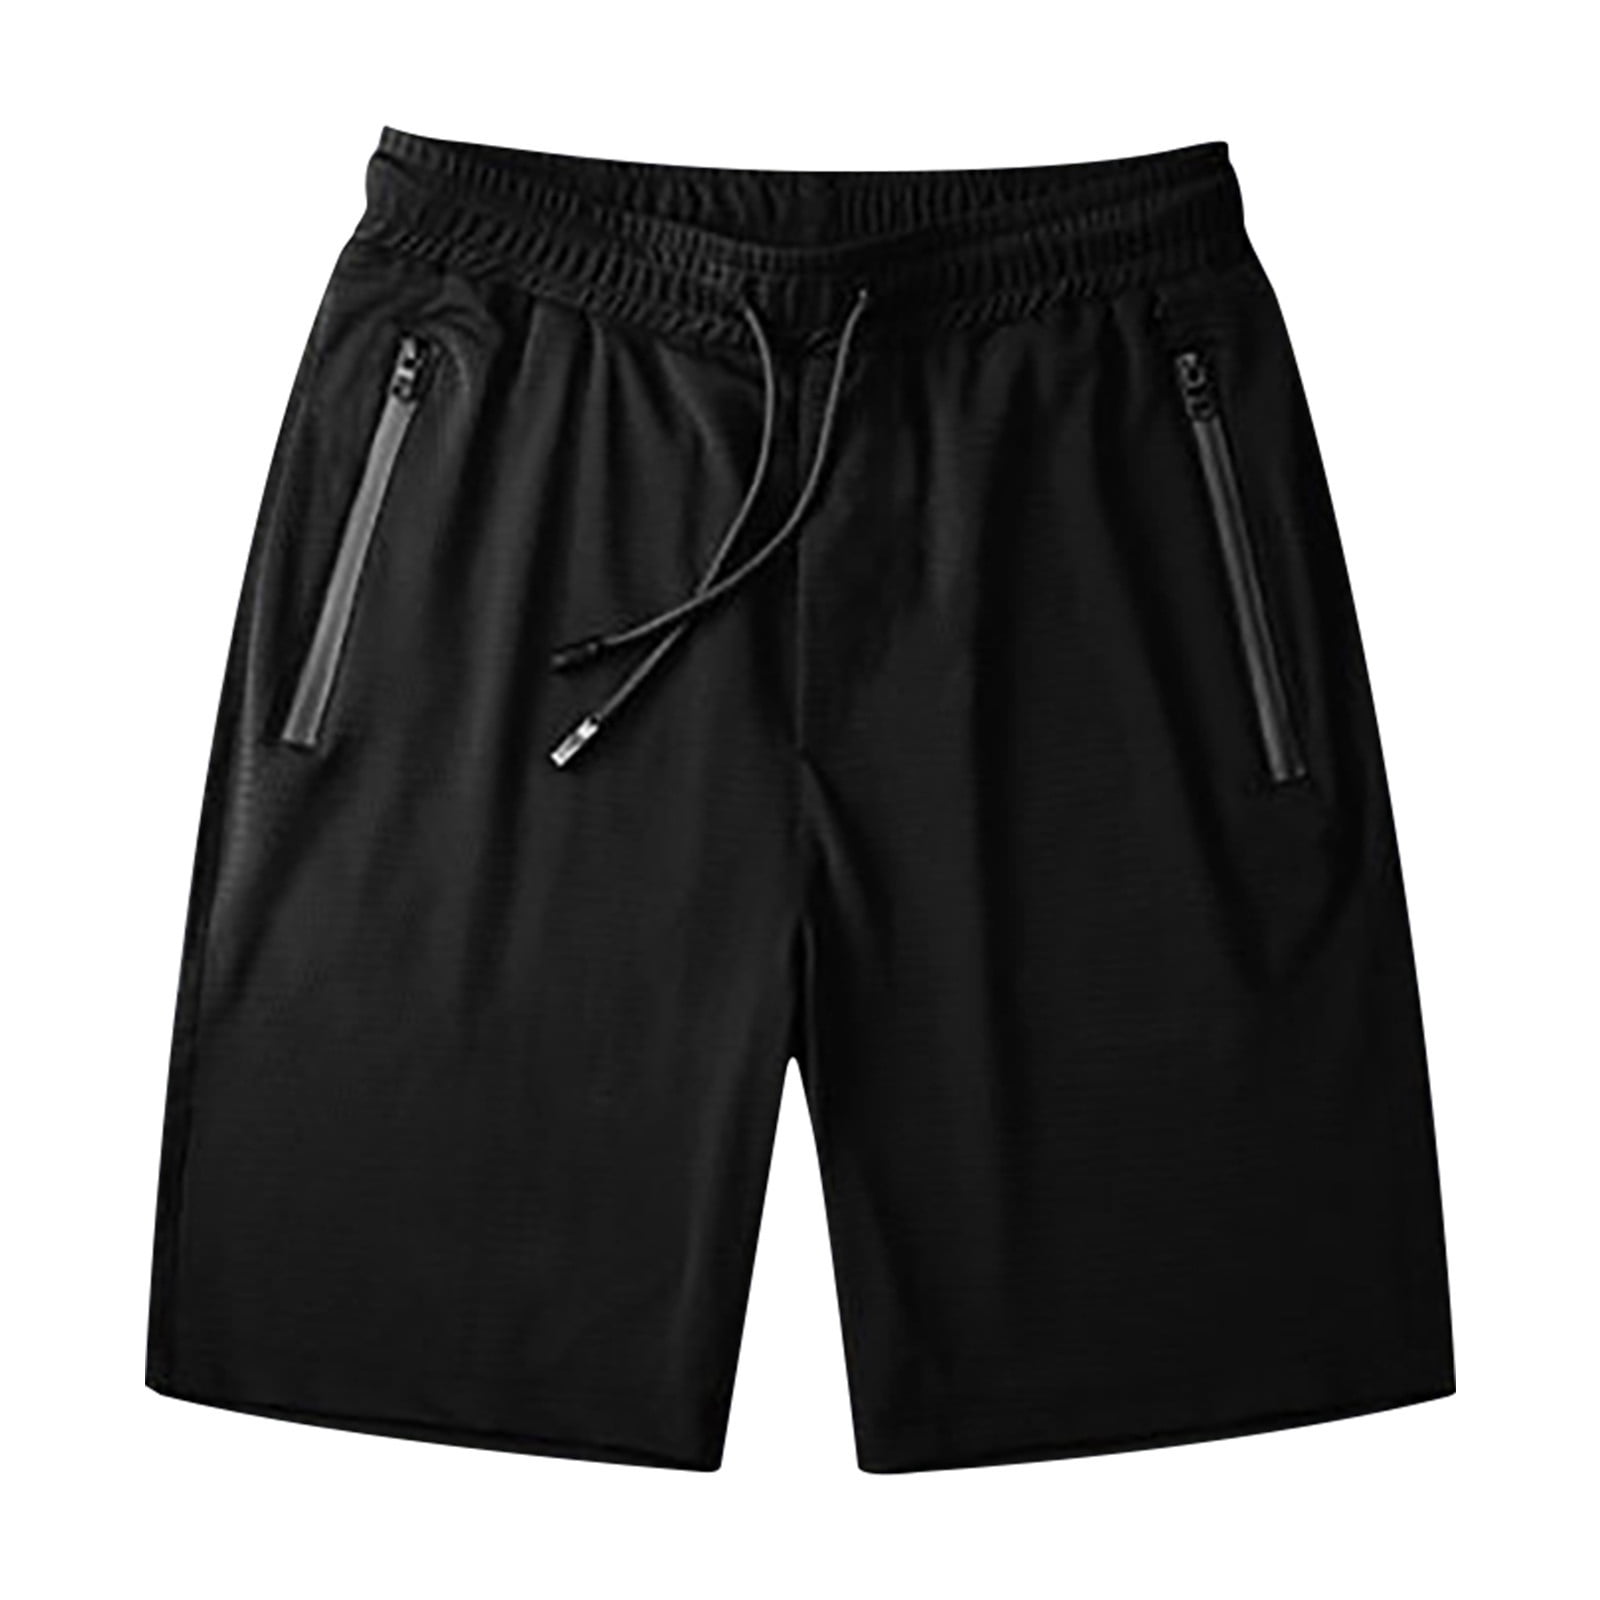 Inleife Mens Shorts Clearance, Men's Ice Silk Fitness Running Stretch ...